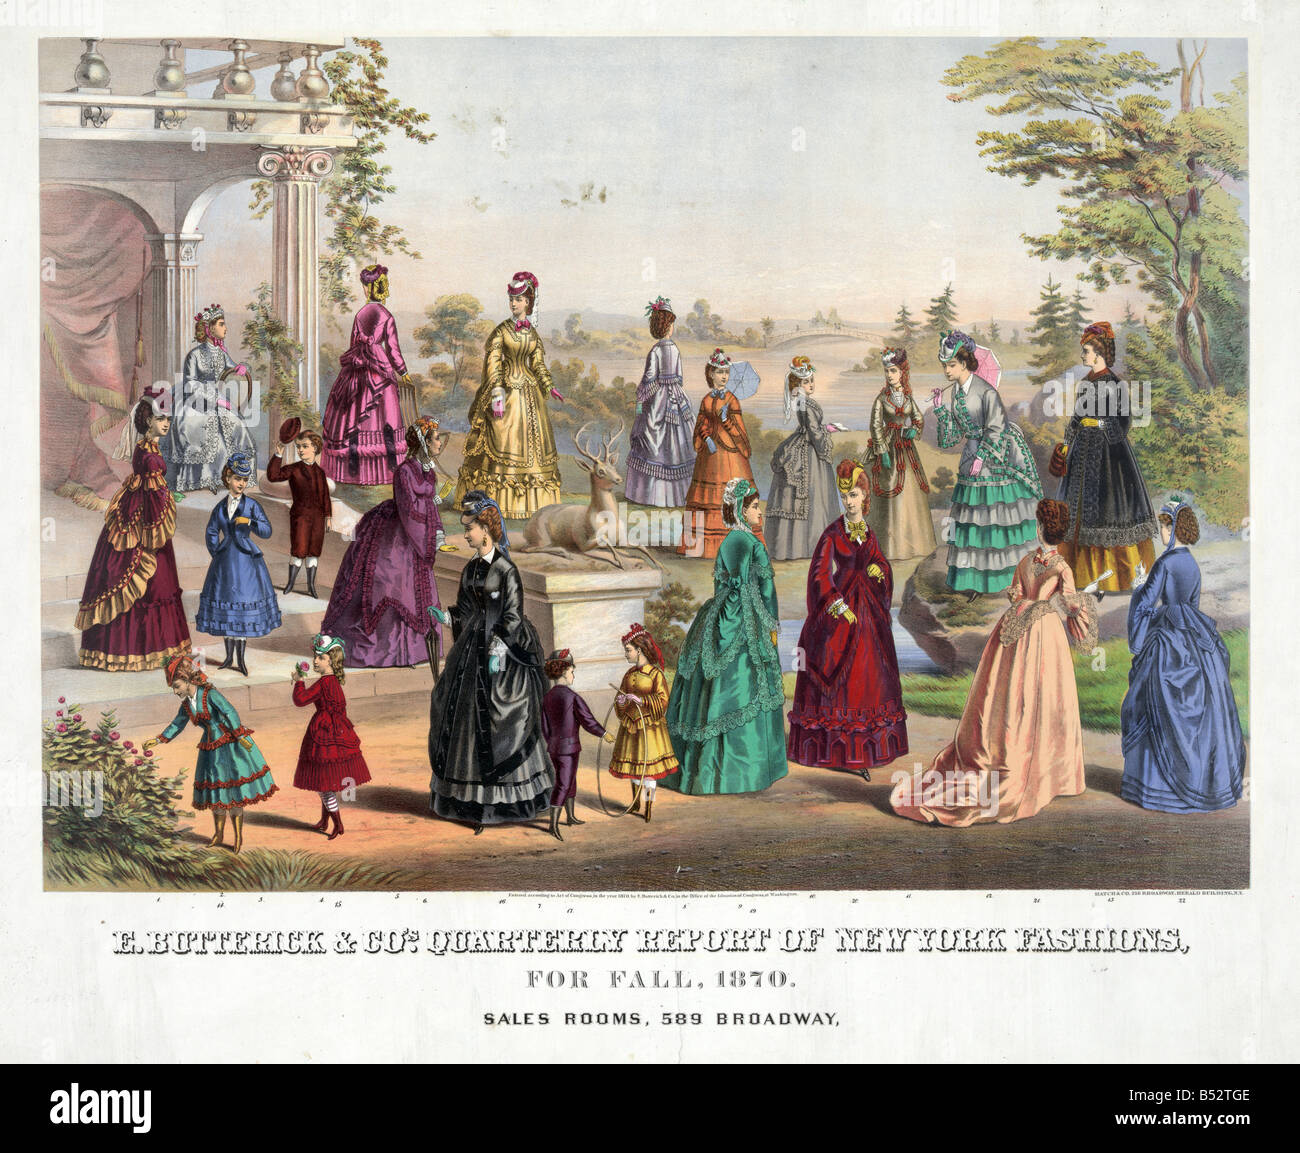 American fashions from 1870 Stock Photo